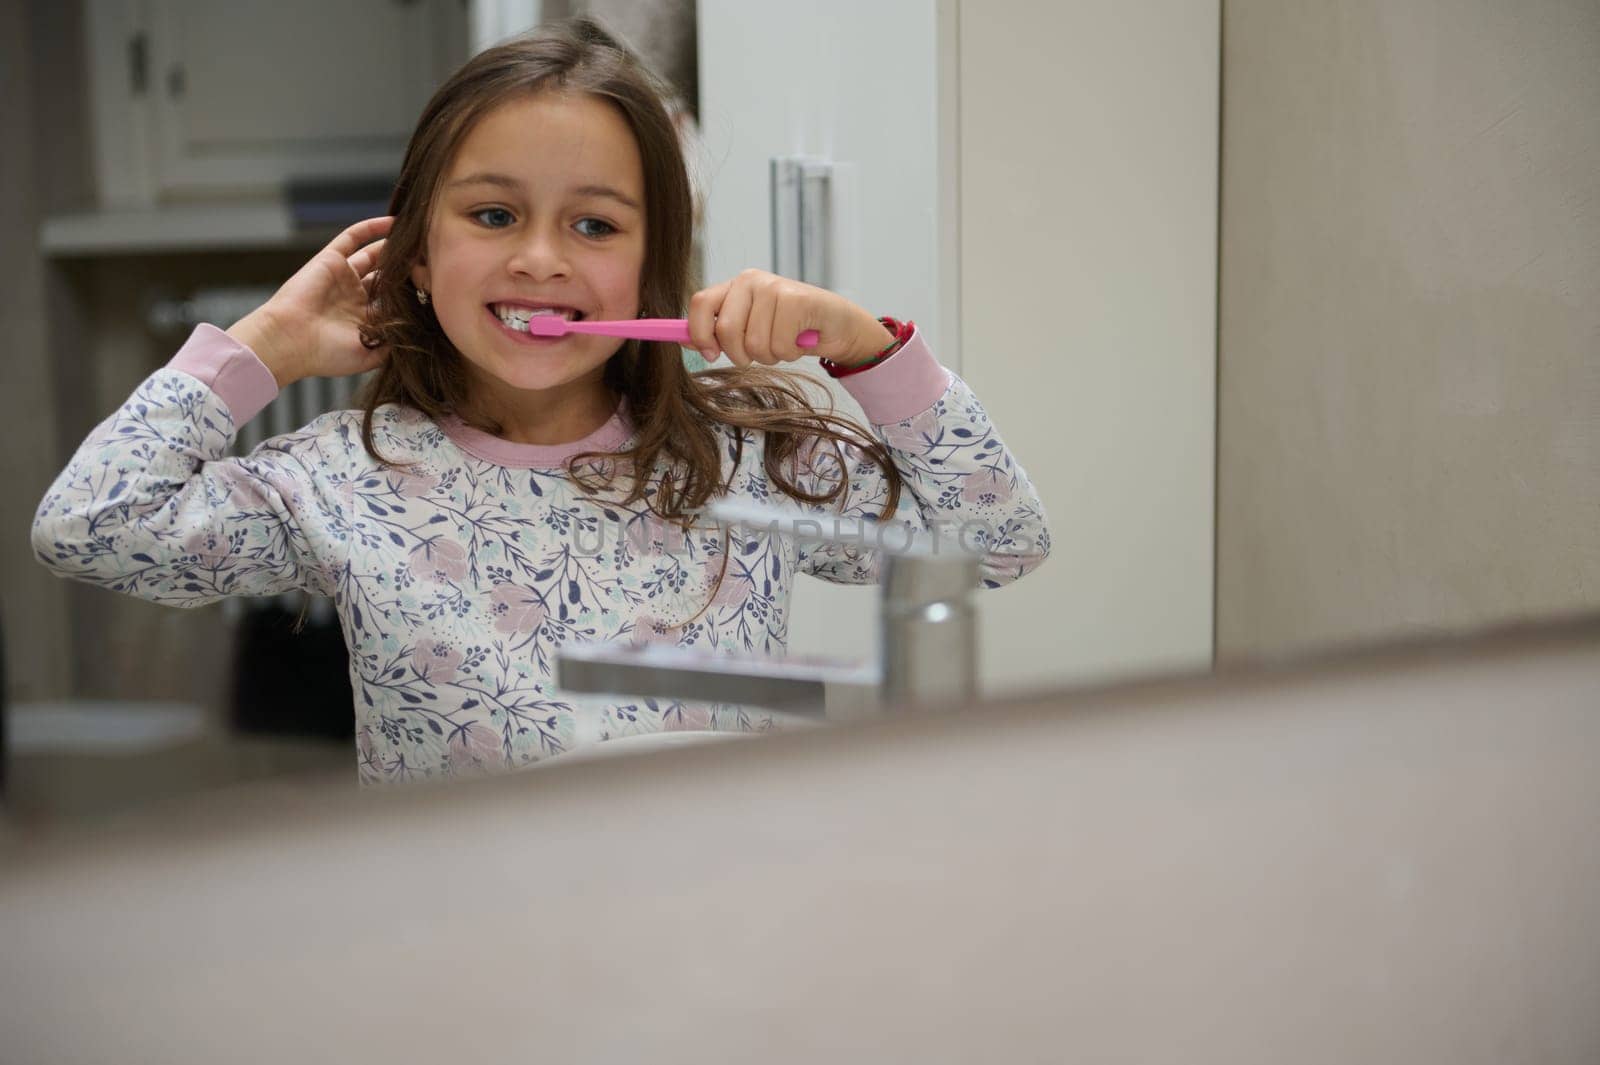 Reflection in the bathroom mirror of a Caucasian cute child girl brushing teeth, dressed in pajamas. Dental hygiene, oral care and healthy lifestyle concept